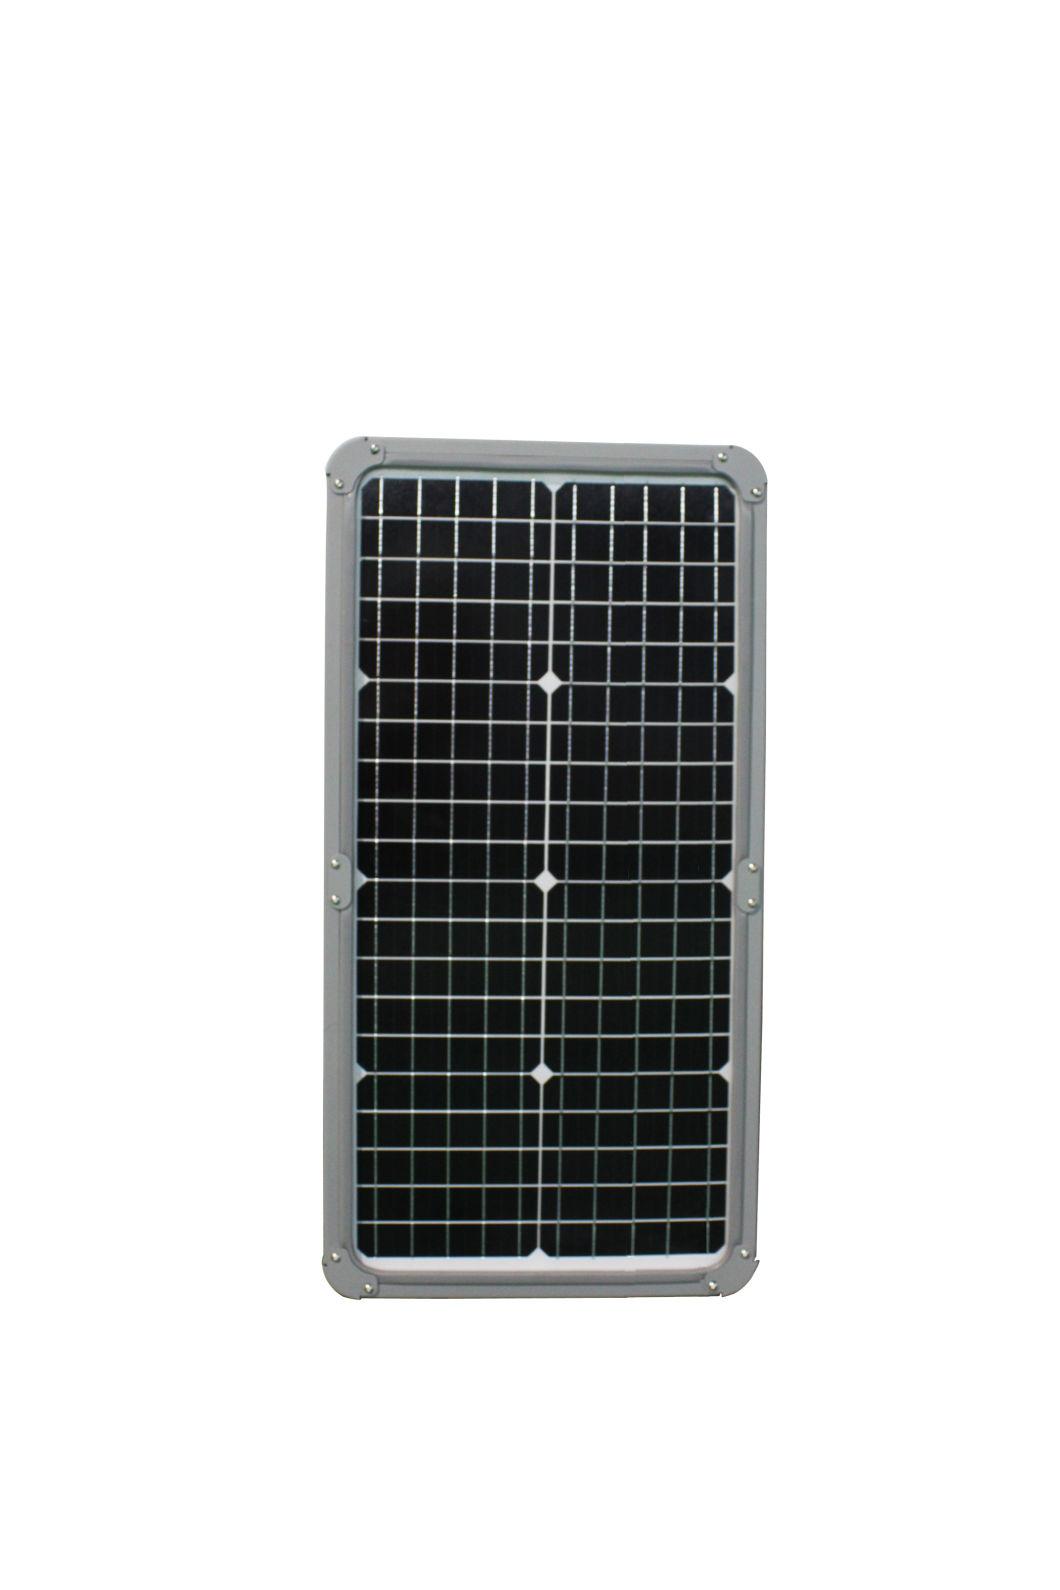 China Factory Price 30W 60W 90W LED Solar Street Light with Lithium Battery All in One Solar Street Light LED